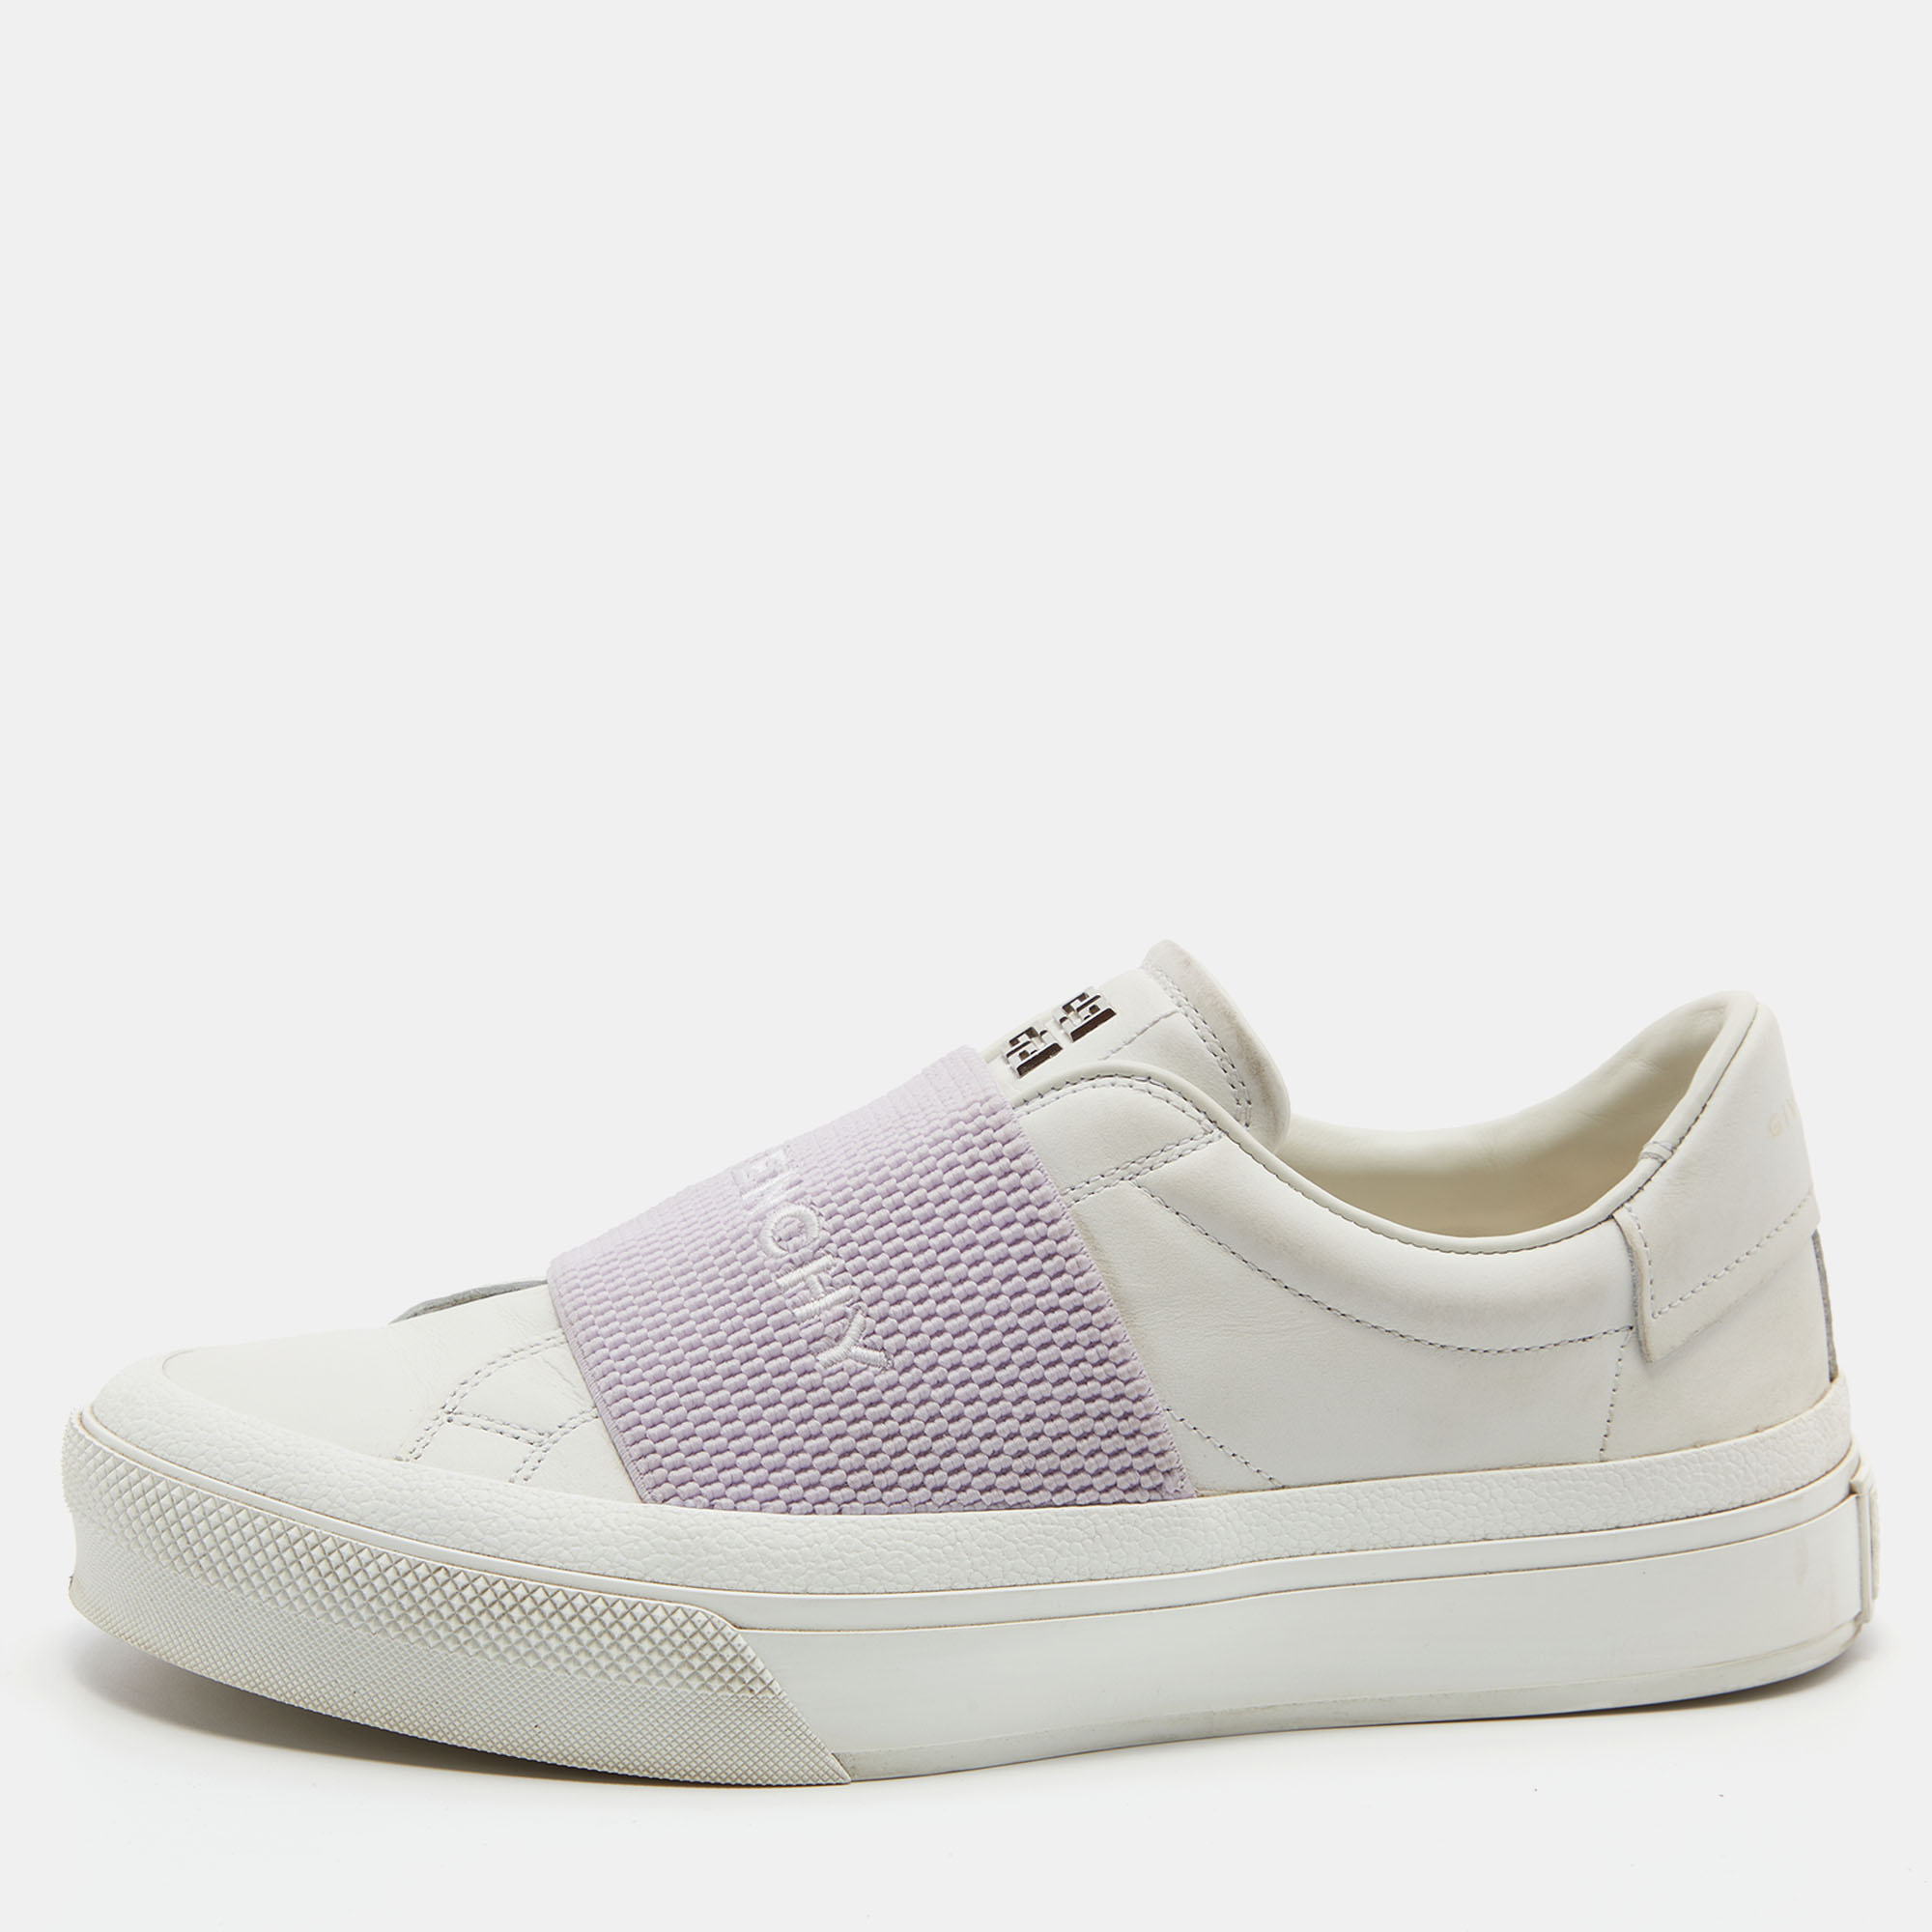 Pre-owned Givenchy White/purple Leather City Sport Slip On Sneakers Size 37